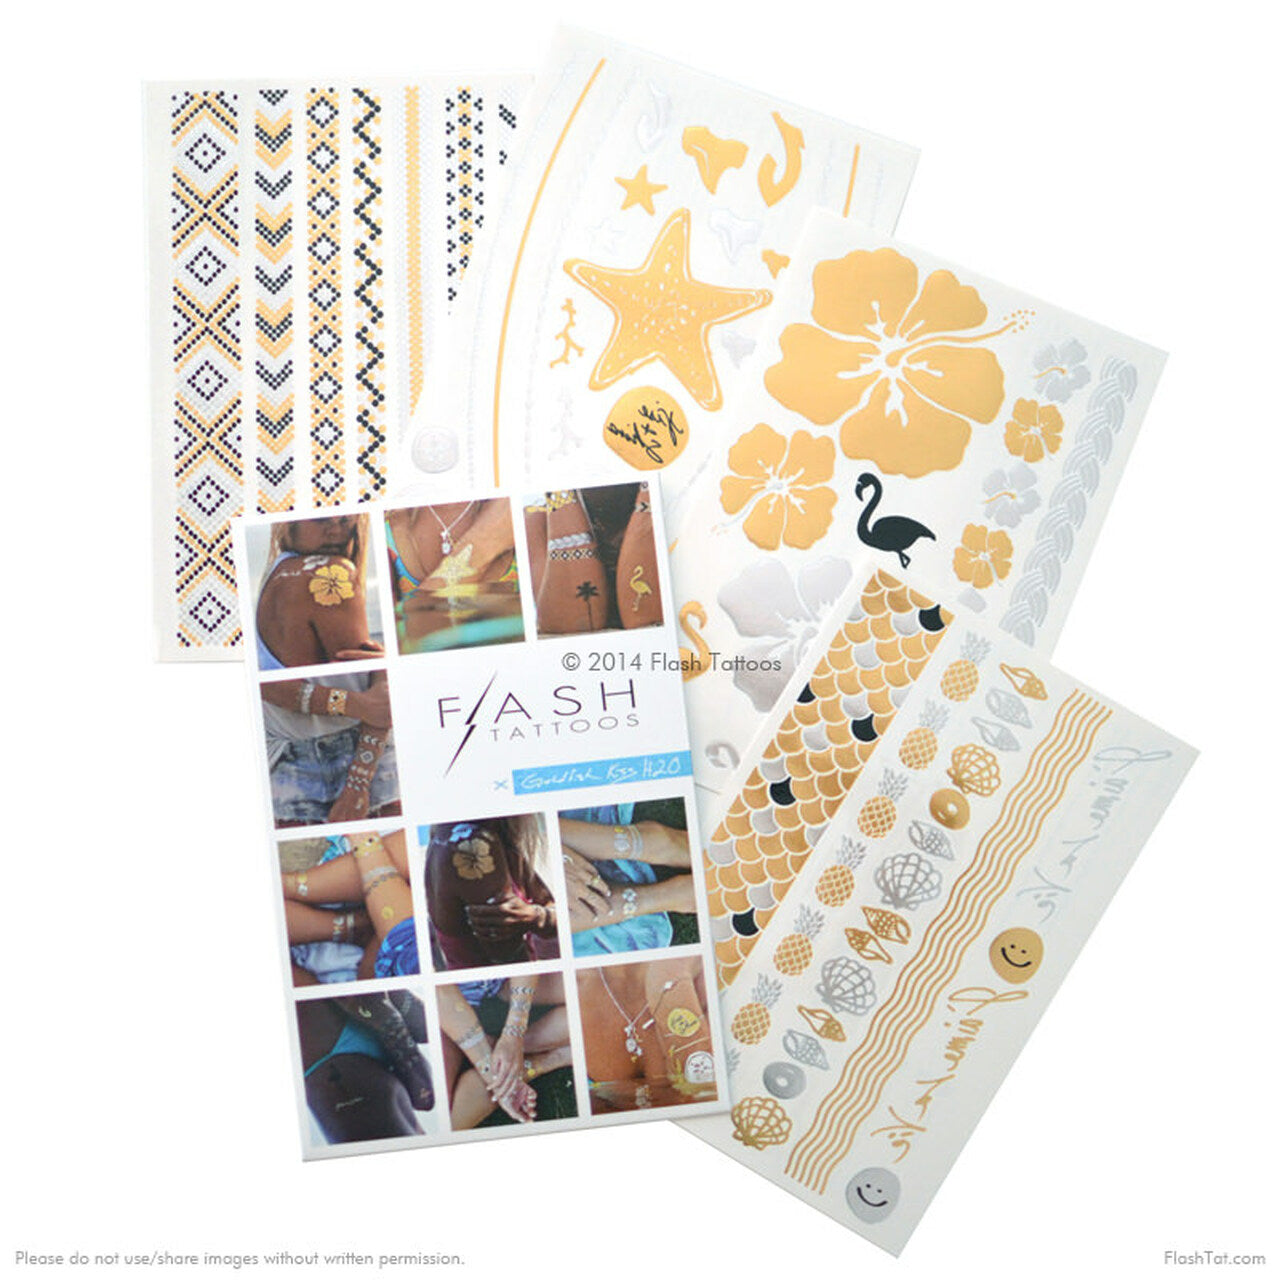 The Goldfish Kiss H20 pack includes 4-sheets with over 40 metallic tropical beachy inspired designs. #FLASHTAT @FlashTattoos